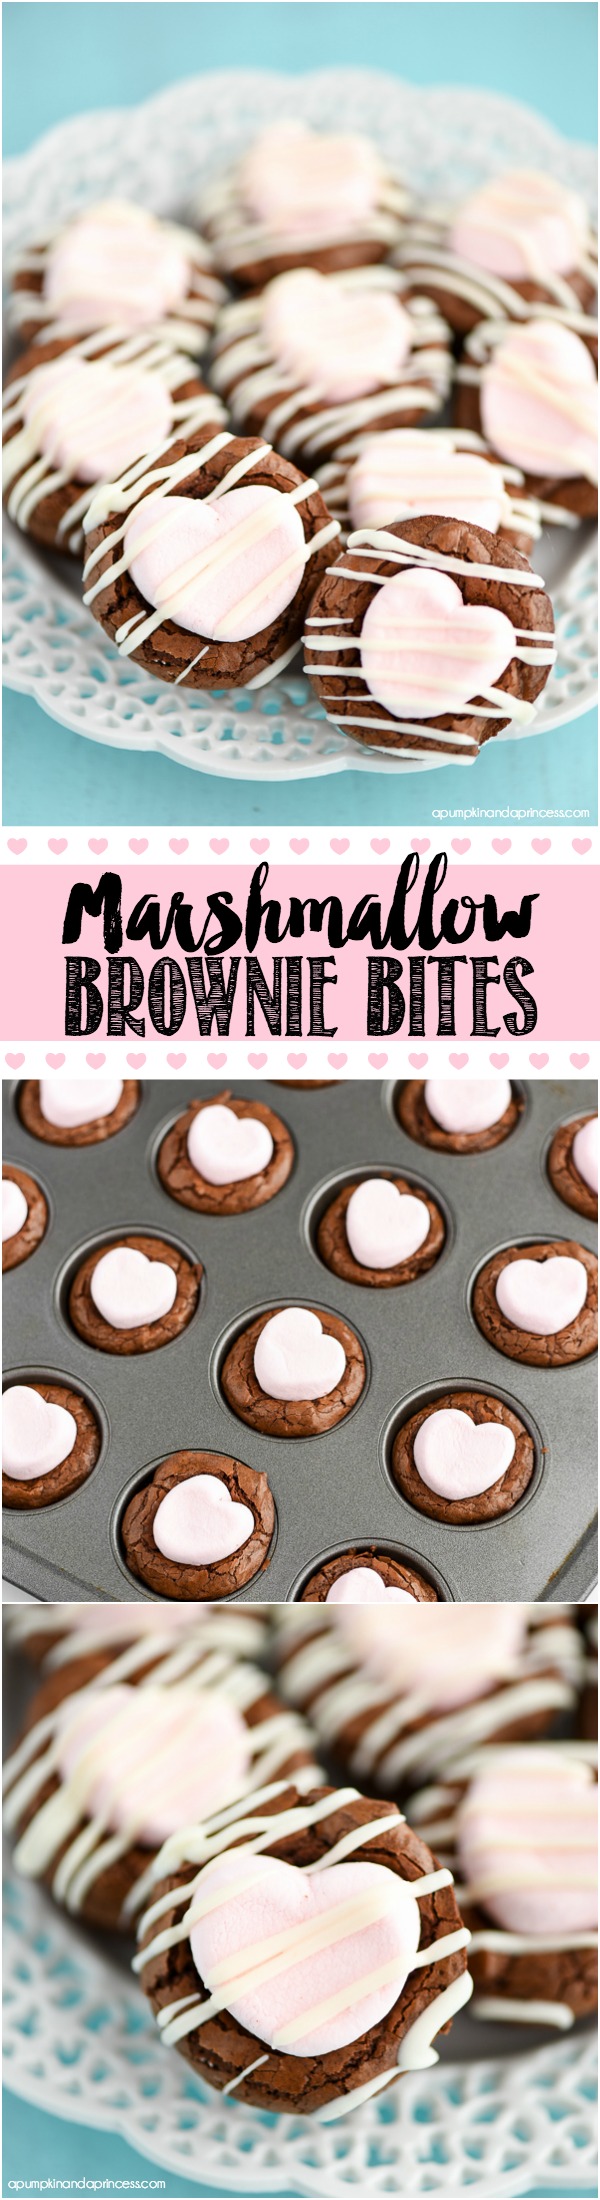 Marshmallow Brownie Bites Recipe - mini brownies topped with strawberry marshmallows and white chocolate